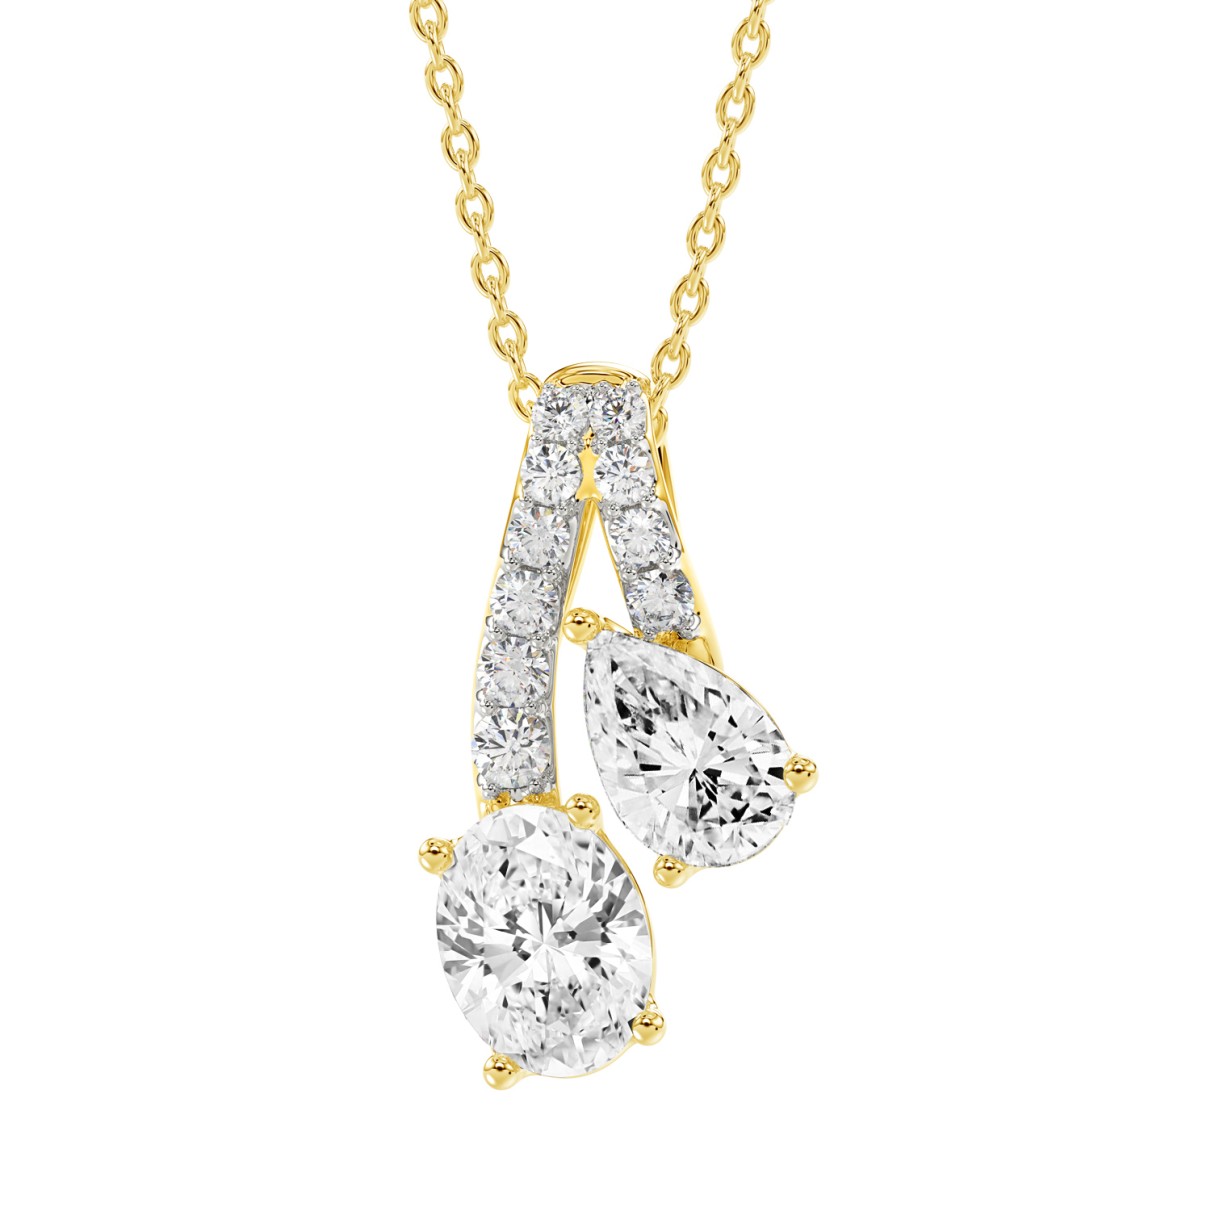 14K YELLOW GOLD 2CT ROUND/OVAL/PEAR DIAMOND LADIES PENDANT WITH CHAIN